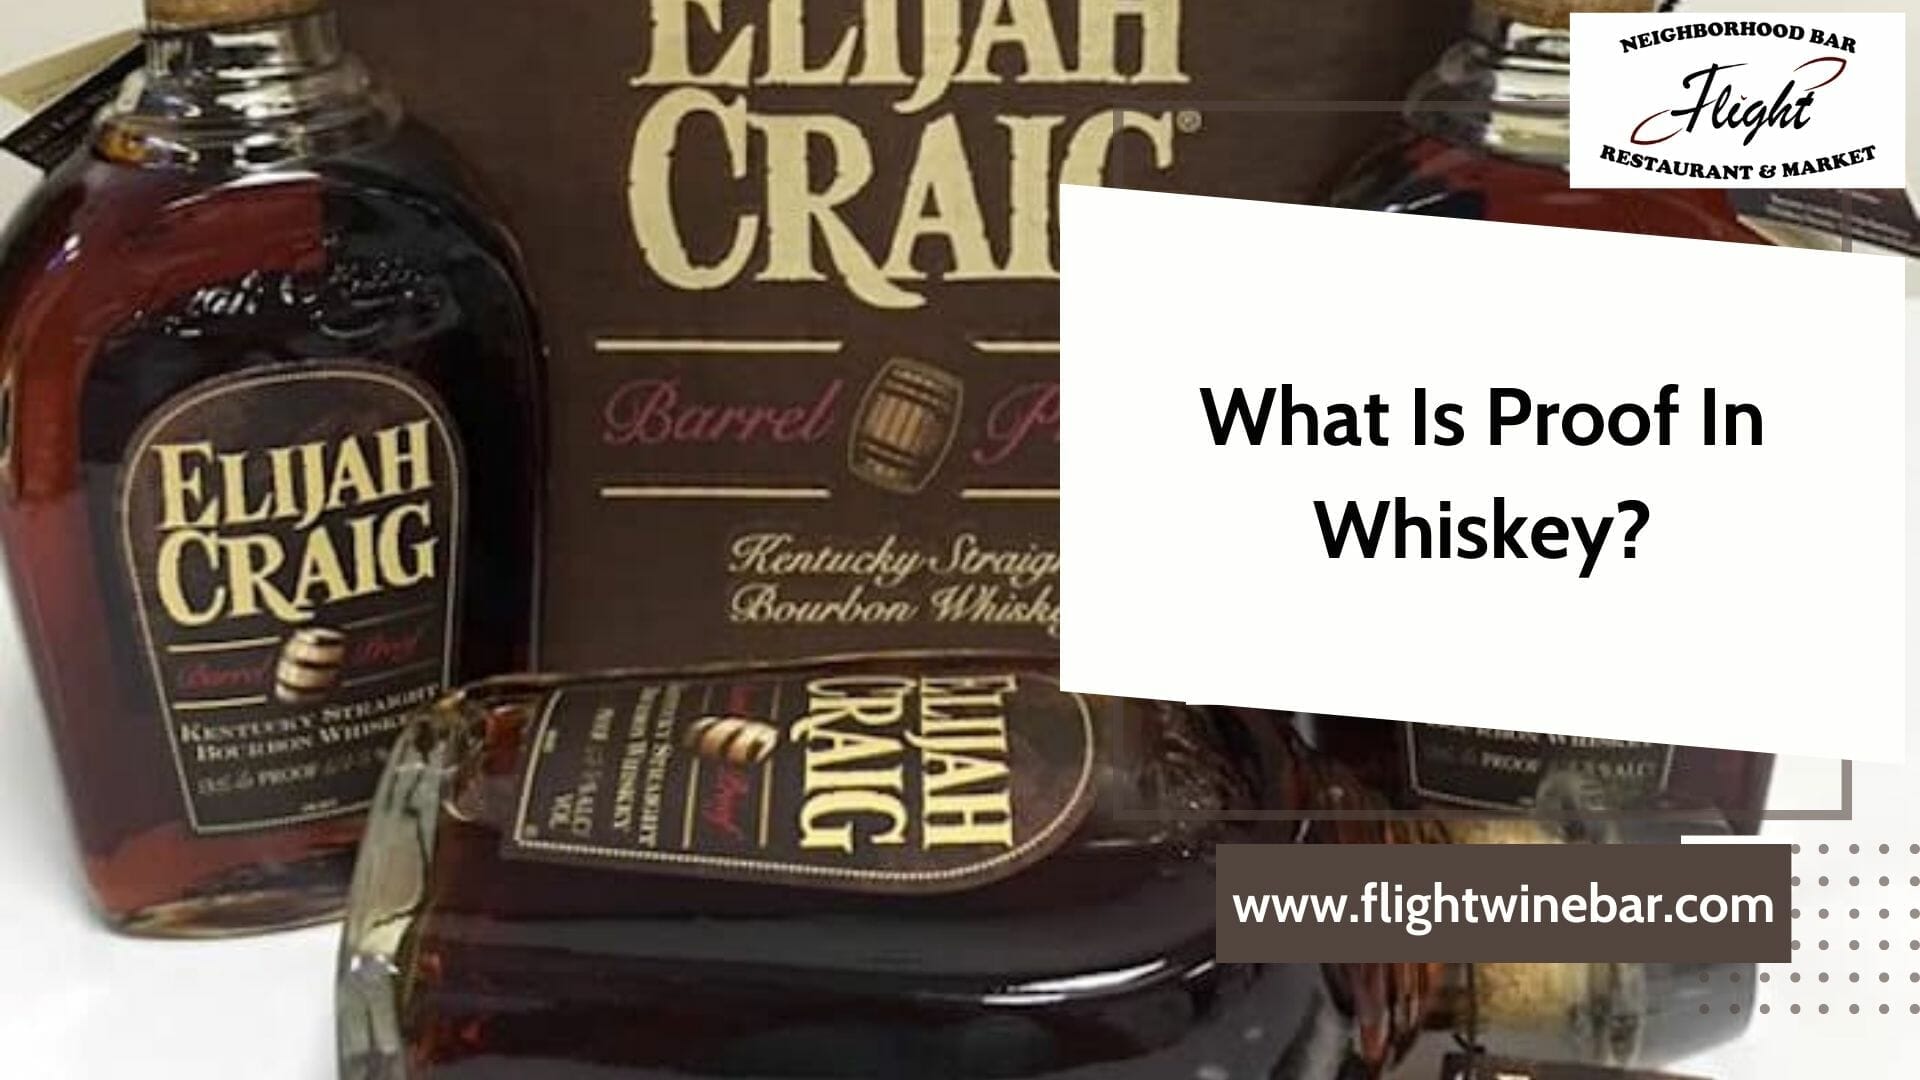 What Is Proof In Whiskey